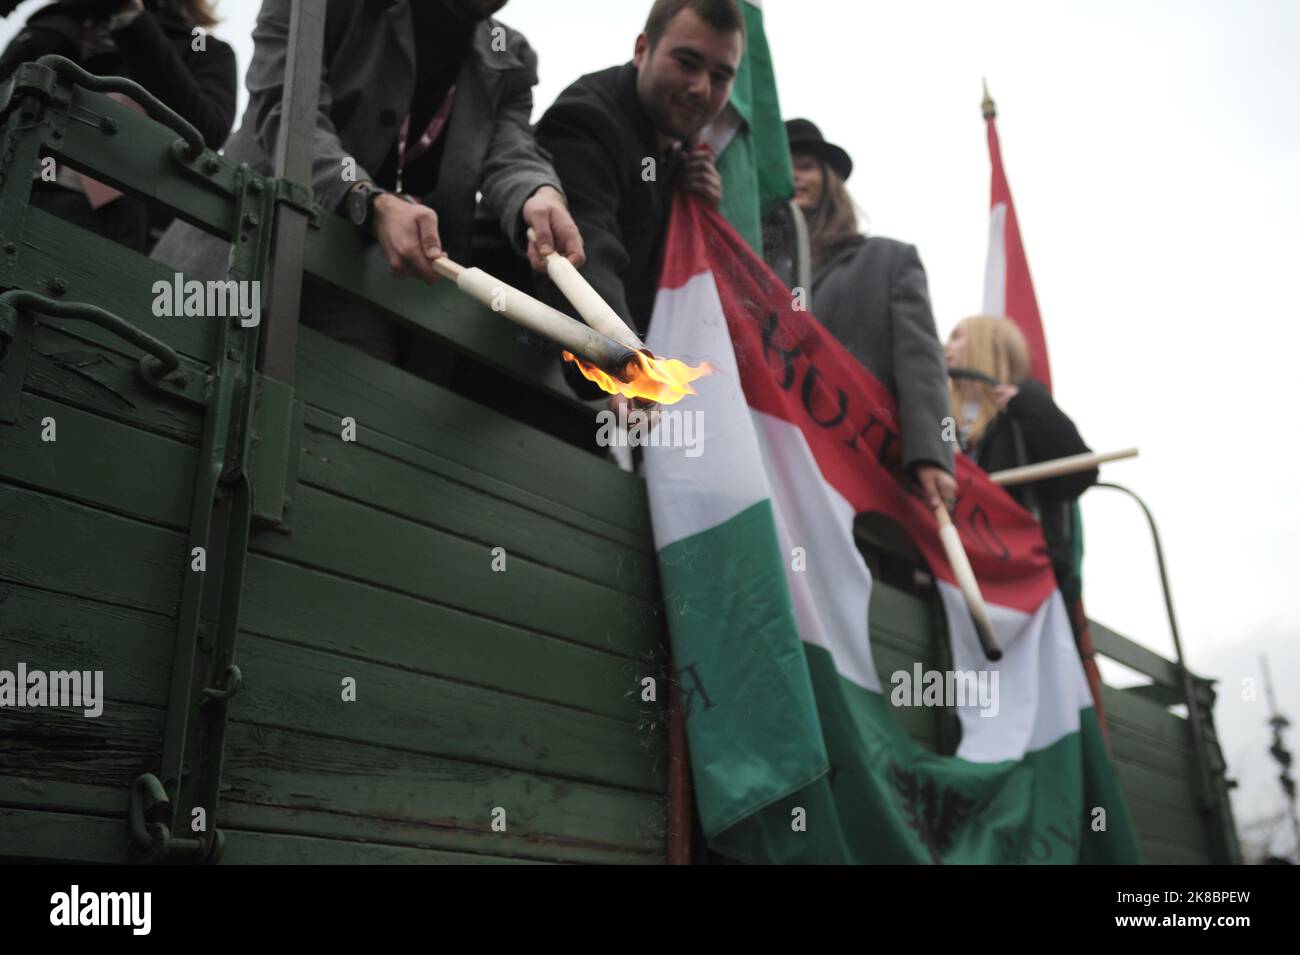 Budapest, Hungary. 22nd Oct, 2022. Touch-light procession in memorial of the 1956 revolution before the memorial day, Budapest, Hungary, 22th Oct 2022, Balint Szentgallay / Alamy Live News Credit: Bálint Szentgallay/Alamy Live News Stock Photo